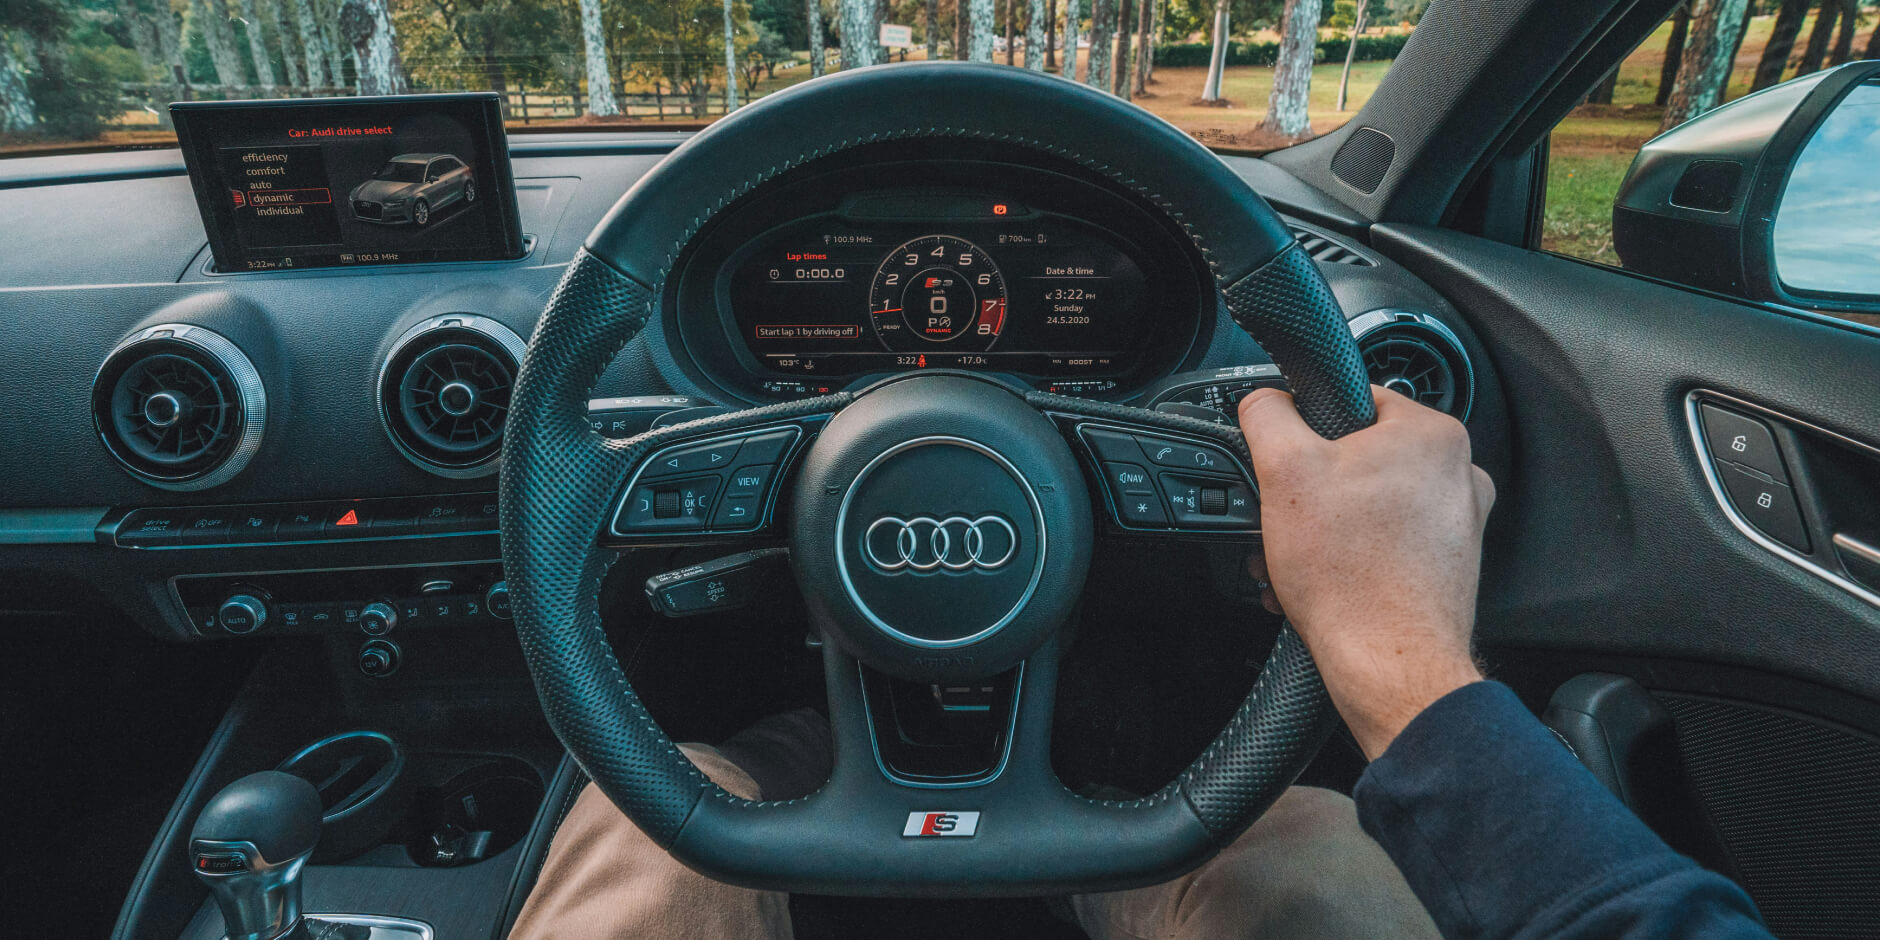 Top Tips for Enjoying Your Audi Sports Car Experience on UK Roads